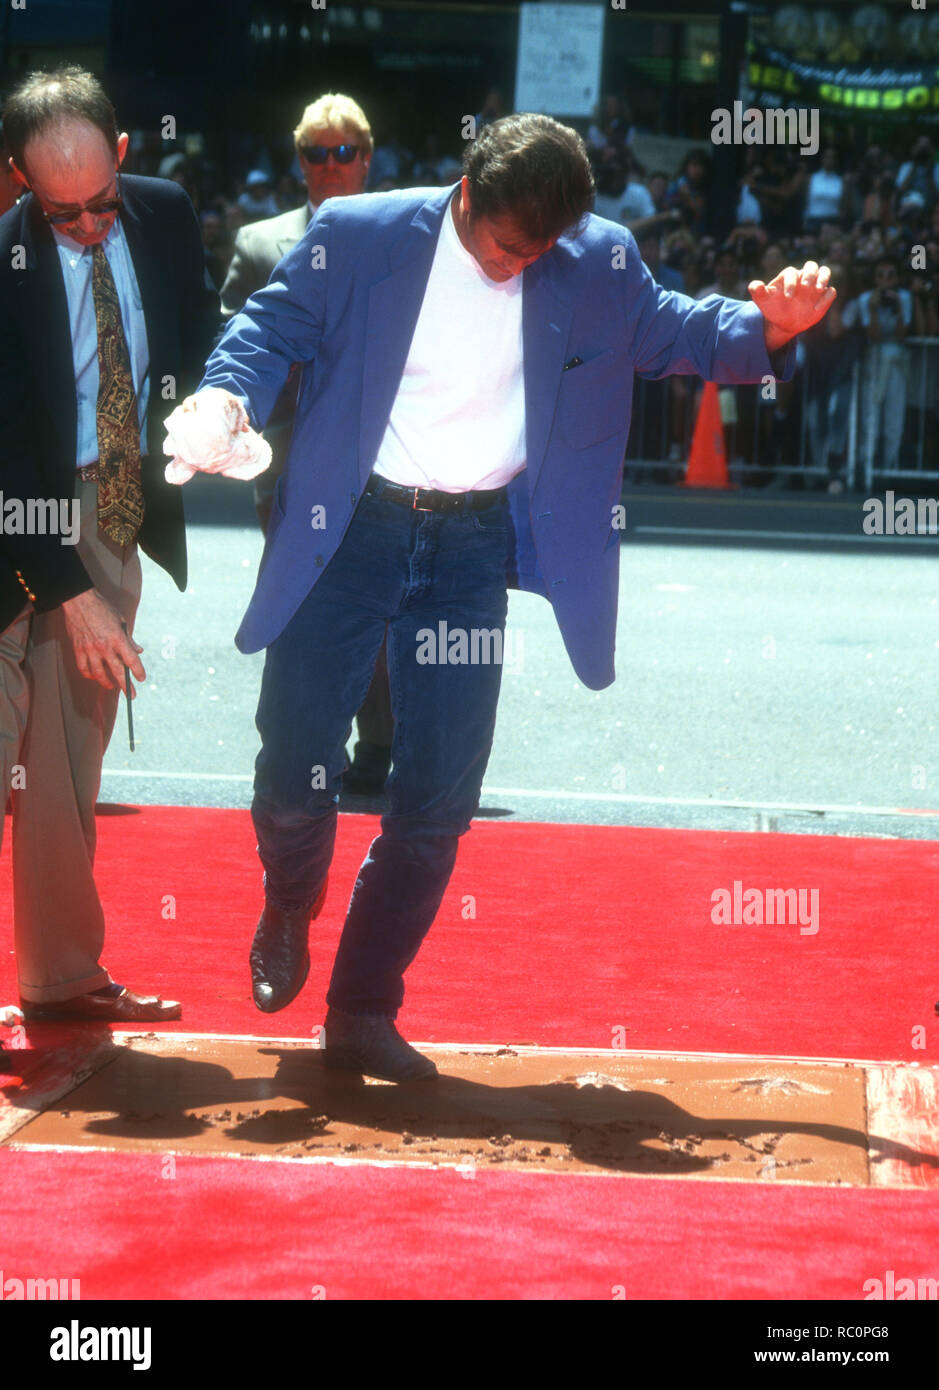 HOLLYWOOD, CA - AUGUST 23: Actor Mel Gibson places his hand and foot prints in cement on August 23, 1993 at Mann's Chinese Theatre in Hollywood, California. Photo by Barry King/Alamy Stock Photo Stock Photo